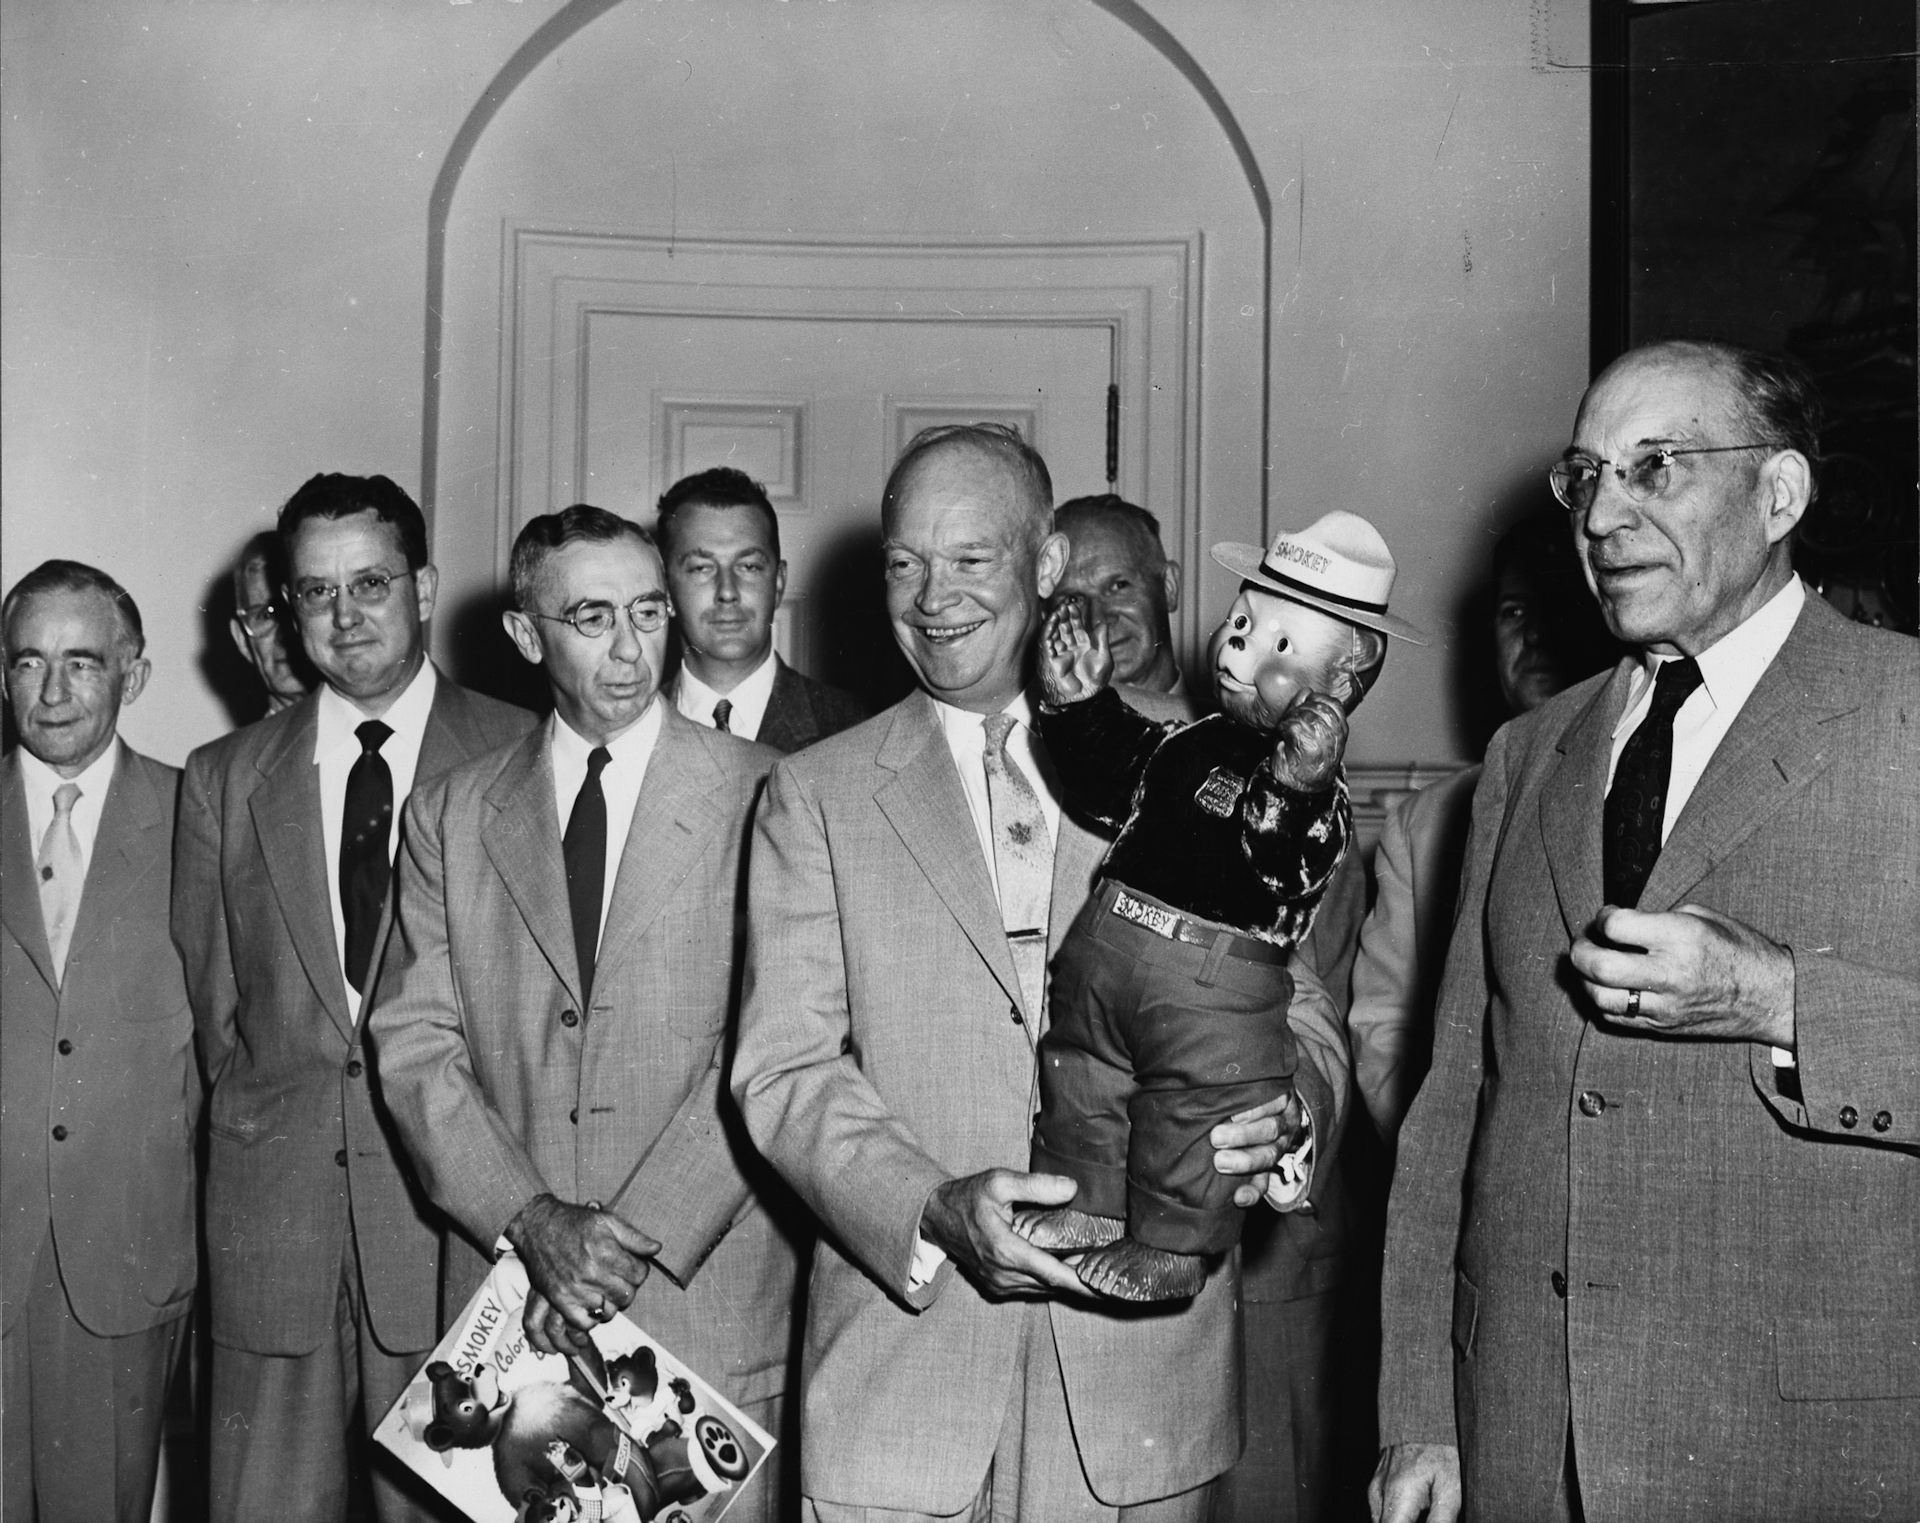 President Eisenhower smiles as he holds up the toddler-sized Smokey Bear doll with men in suits flanking him.